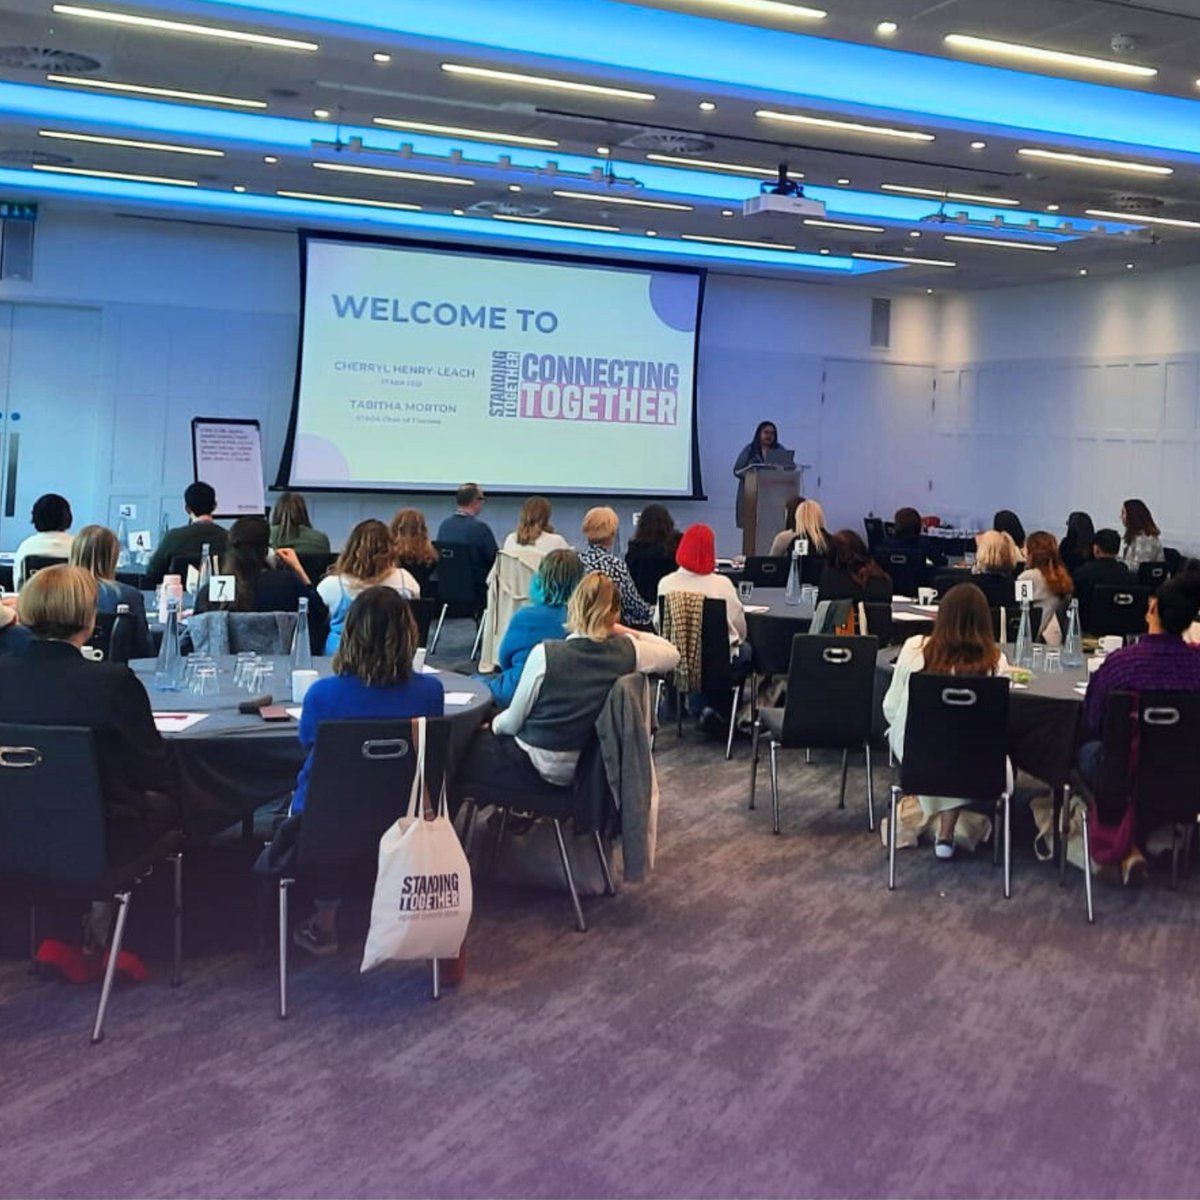 We had a fantastic away day on Wednesday at @etcvenues in London. As our CEO Cherryl says 'It was great to see our staff team Connect & Reflect - so much commitment, talent and creativity. I'm so proud to lead this team!' Thanks team Standing Together!